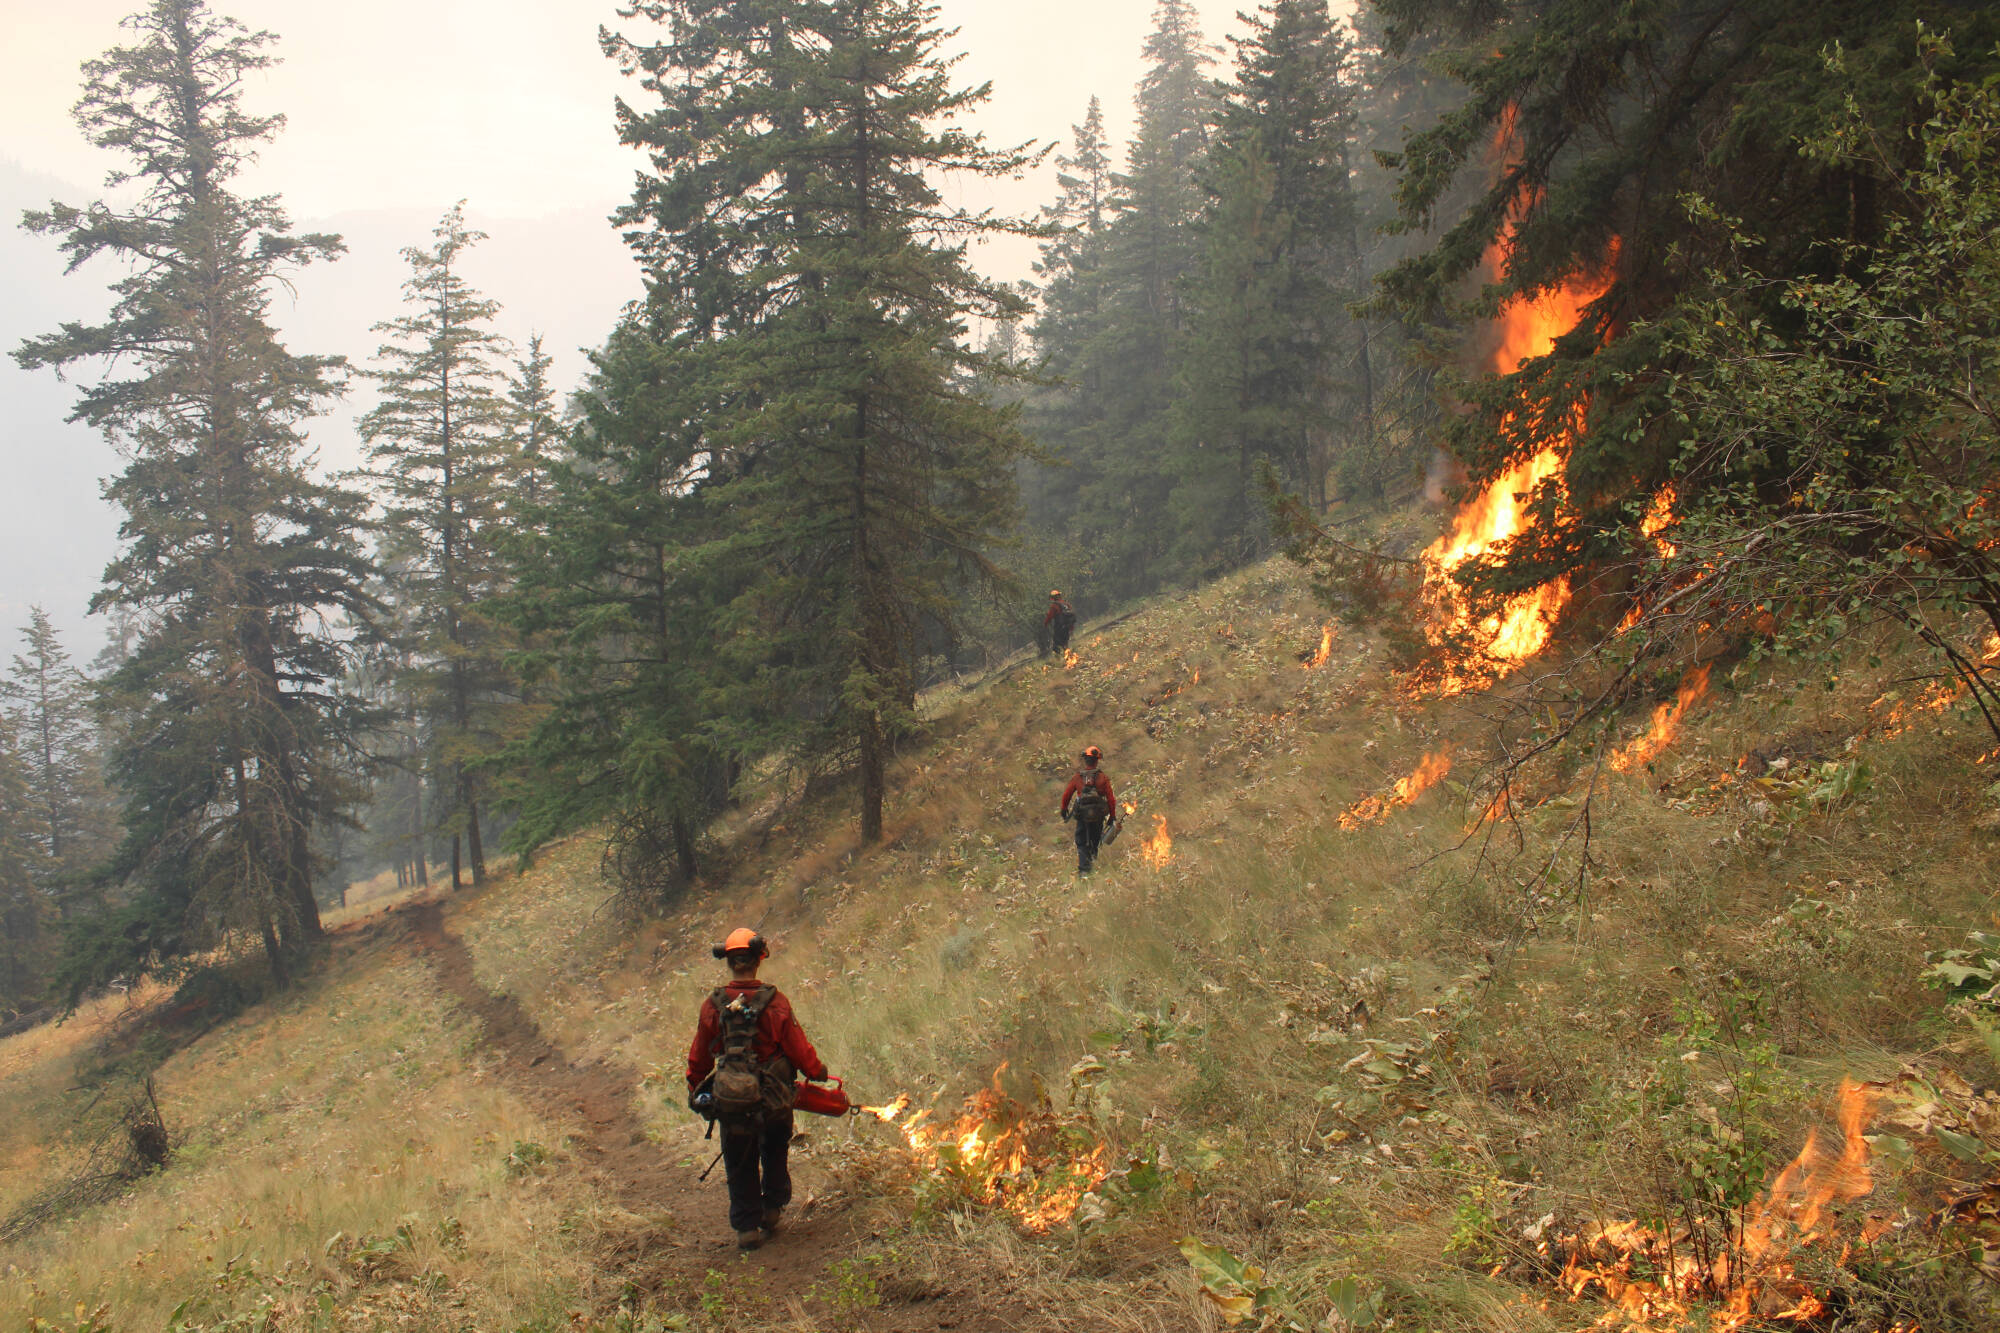 BC Wildfire Service firefighters set hand ignitions along the edge of the Keremeos Creek Wildfire to control burn-off fuel. (BCWS)